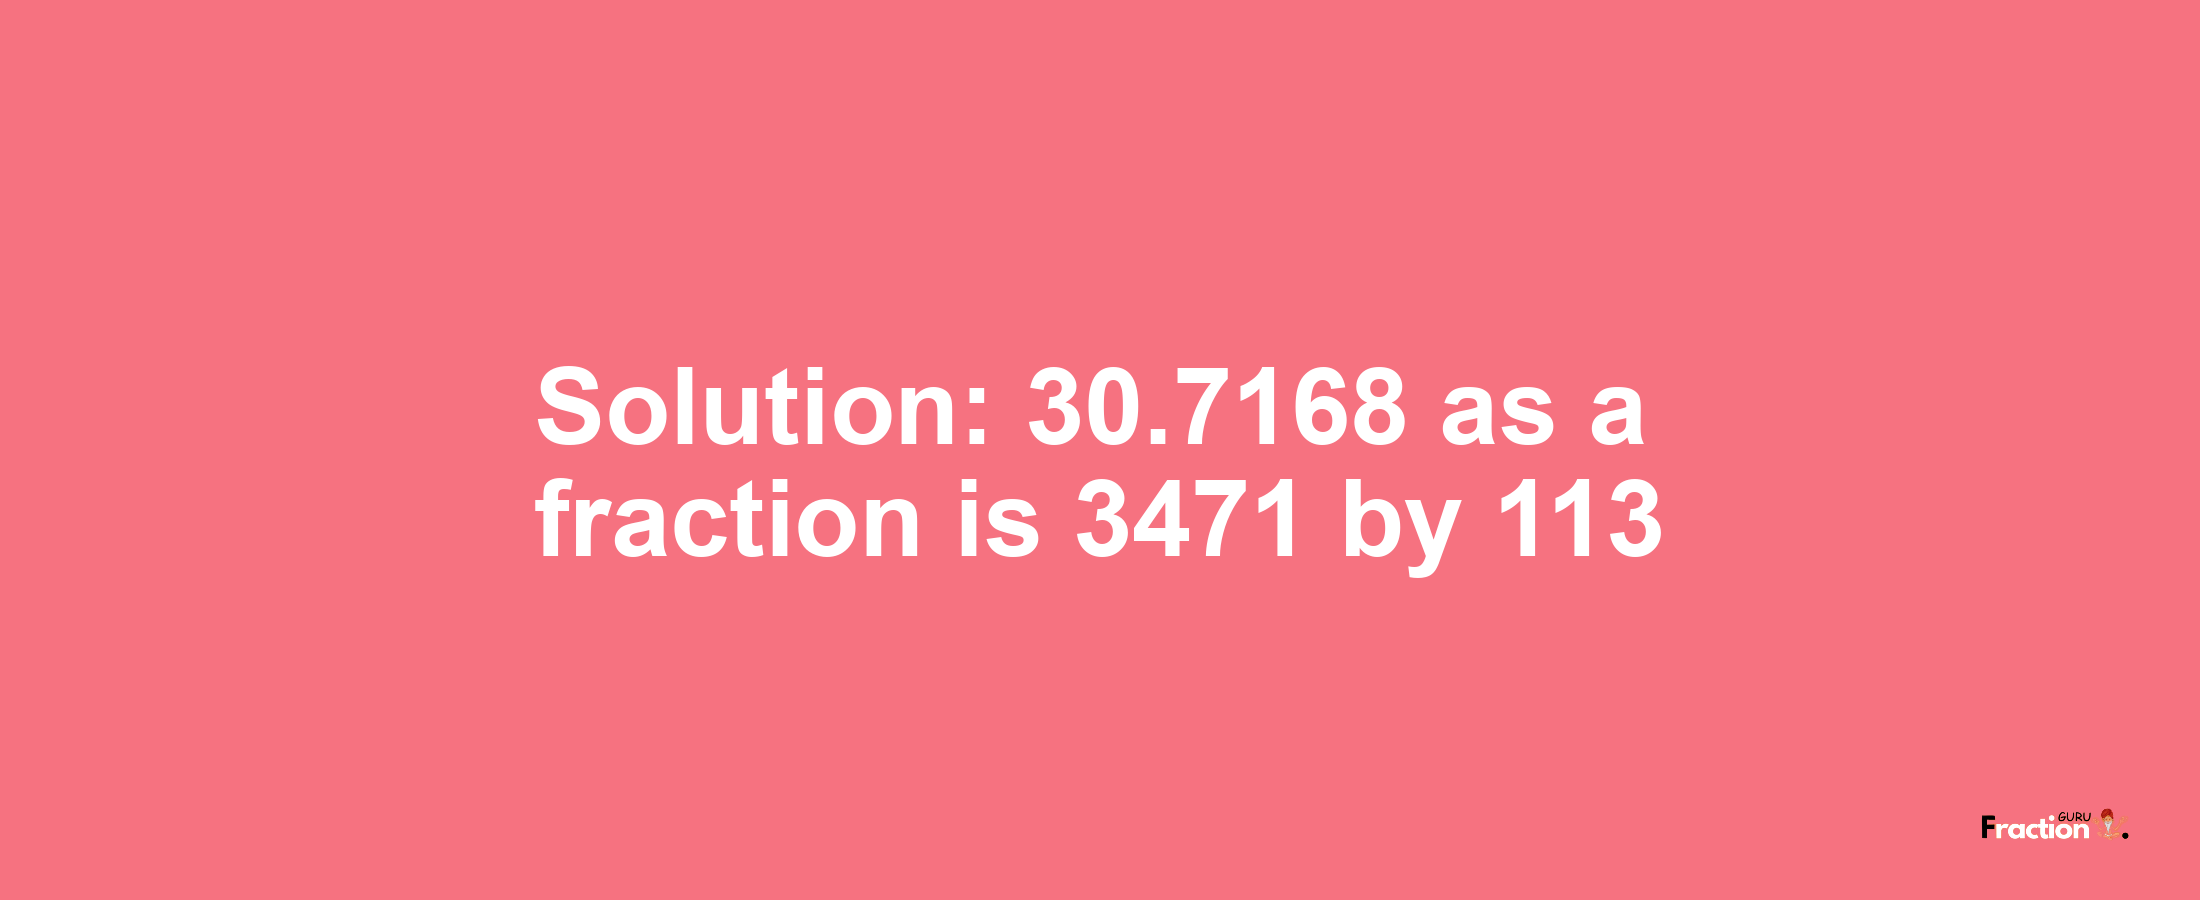 Solution:30.7168 as a fraction is 3471/113